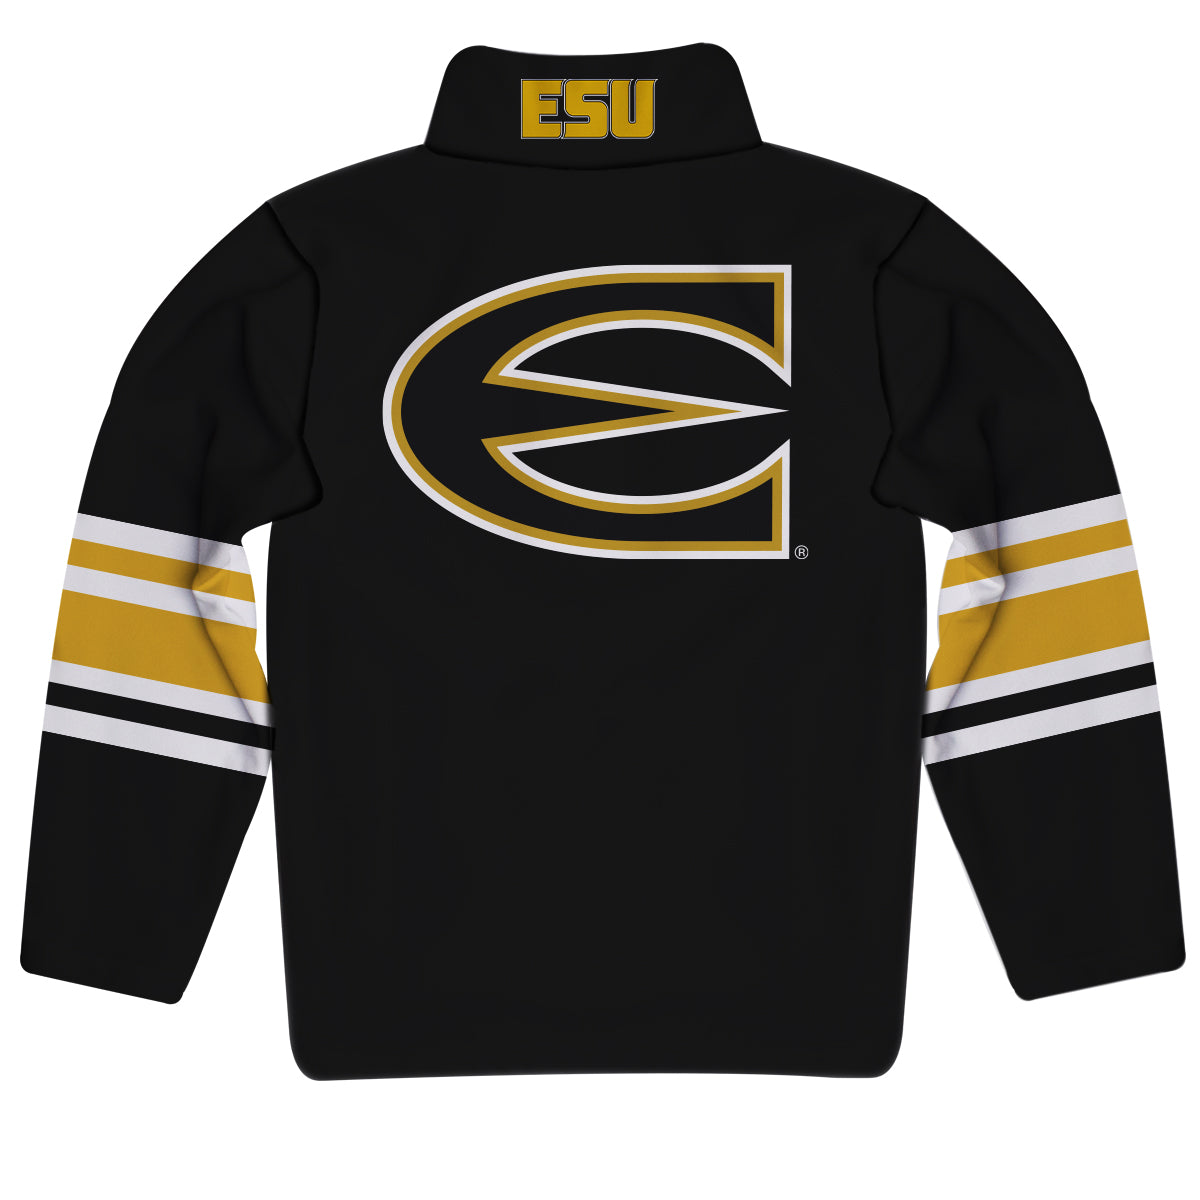 Emporia State Hornets Game Day Black Quarter Zip Pullover for Infants Toddlers by Vive La Fete